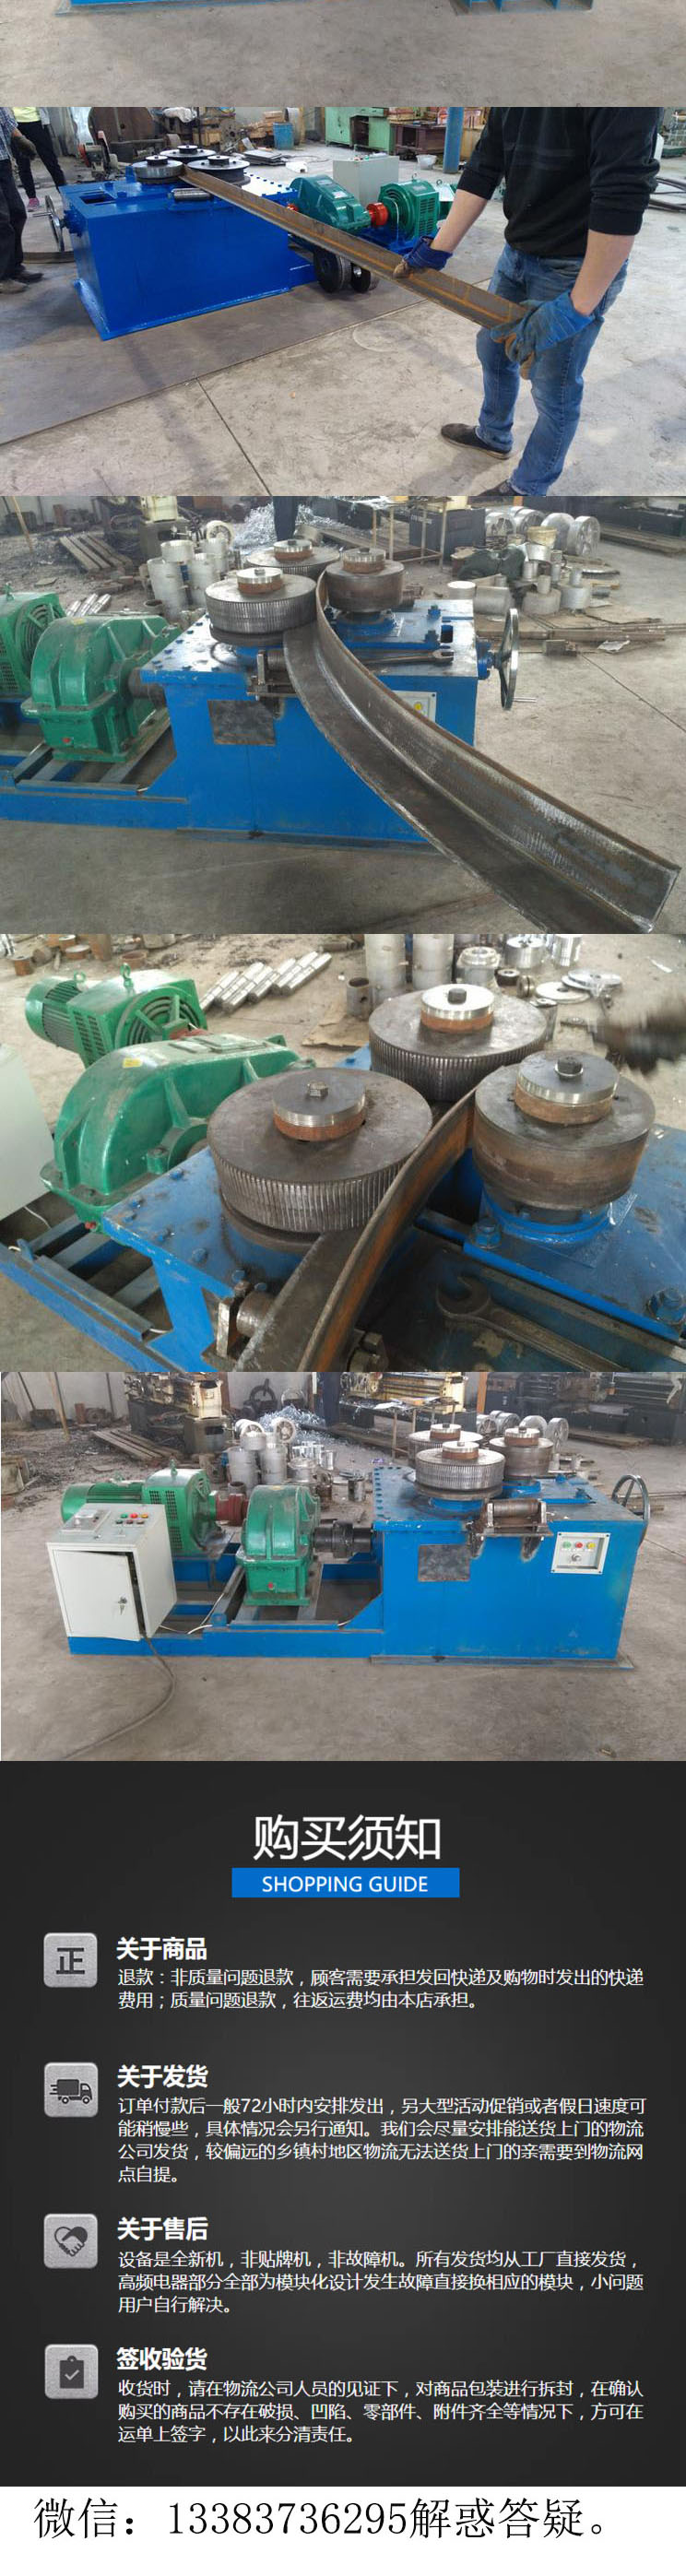 Shengjili makes F6 flange forming machine, which can roll angle steel, flat steel, and other materials, running smoothly